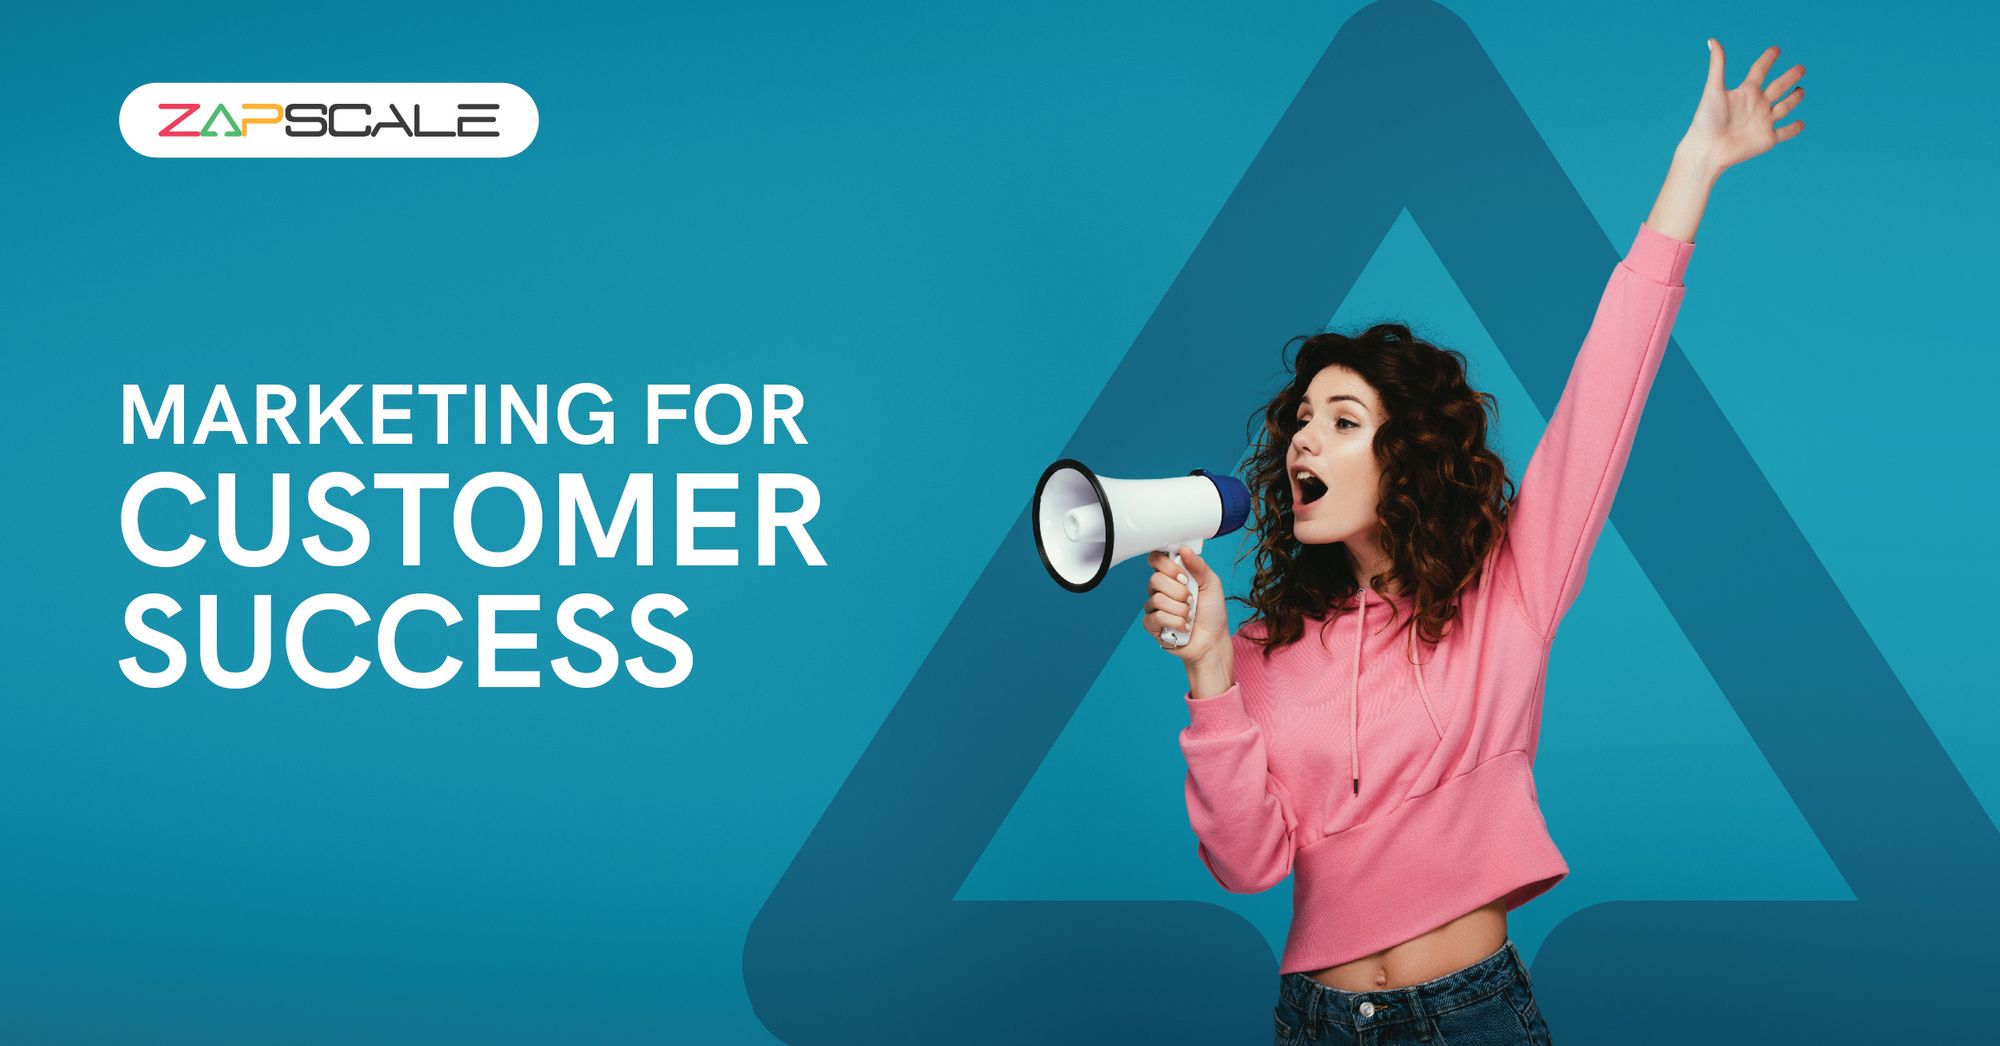 Are we doing the right marketing for Customer Success?